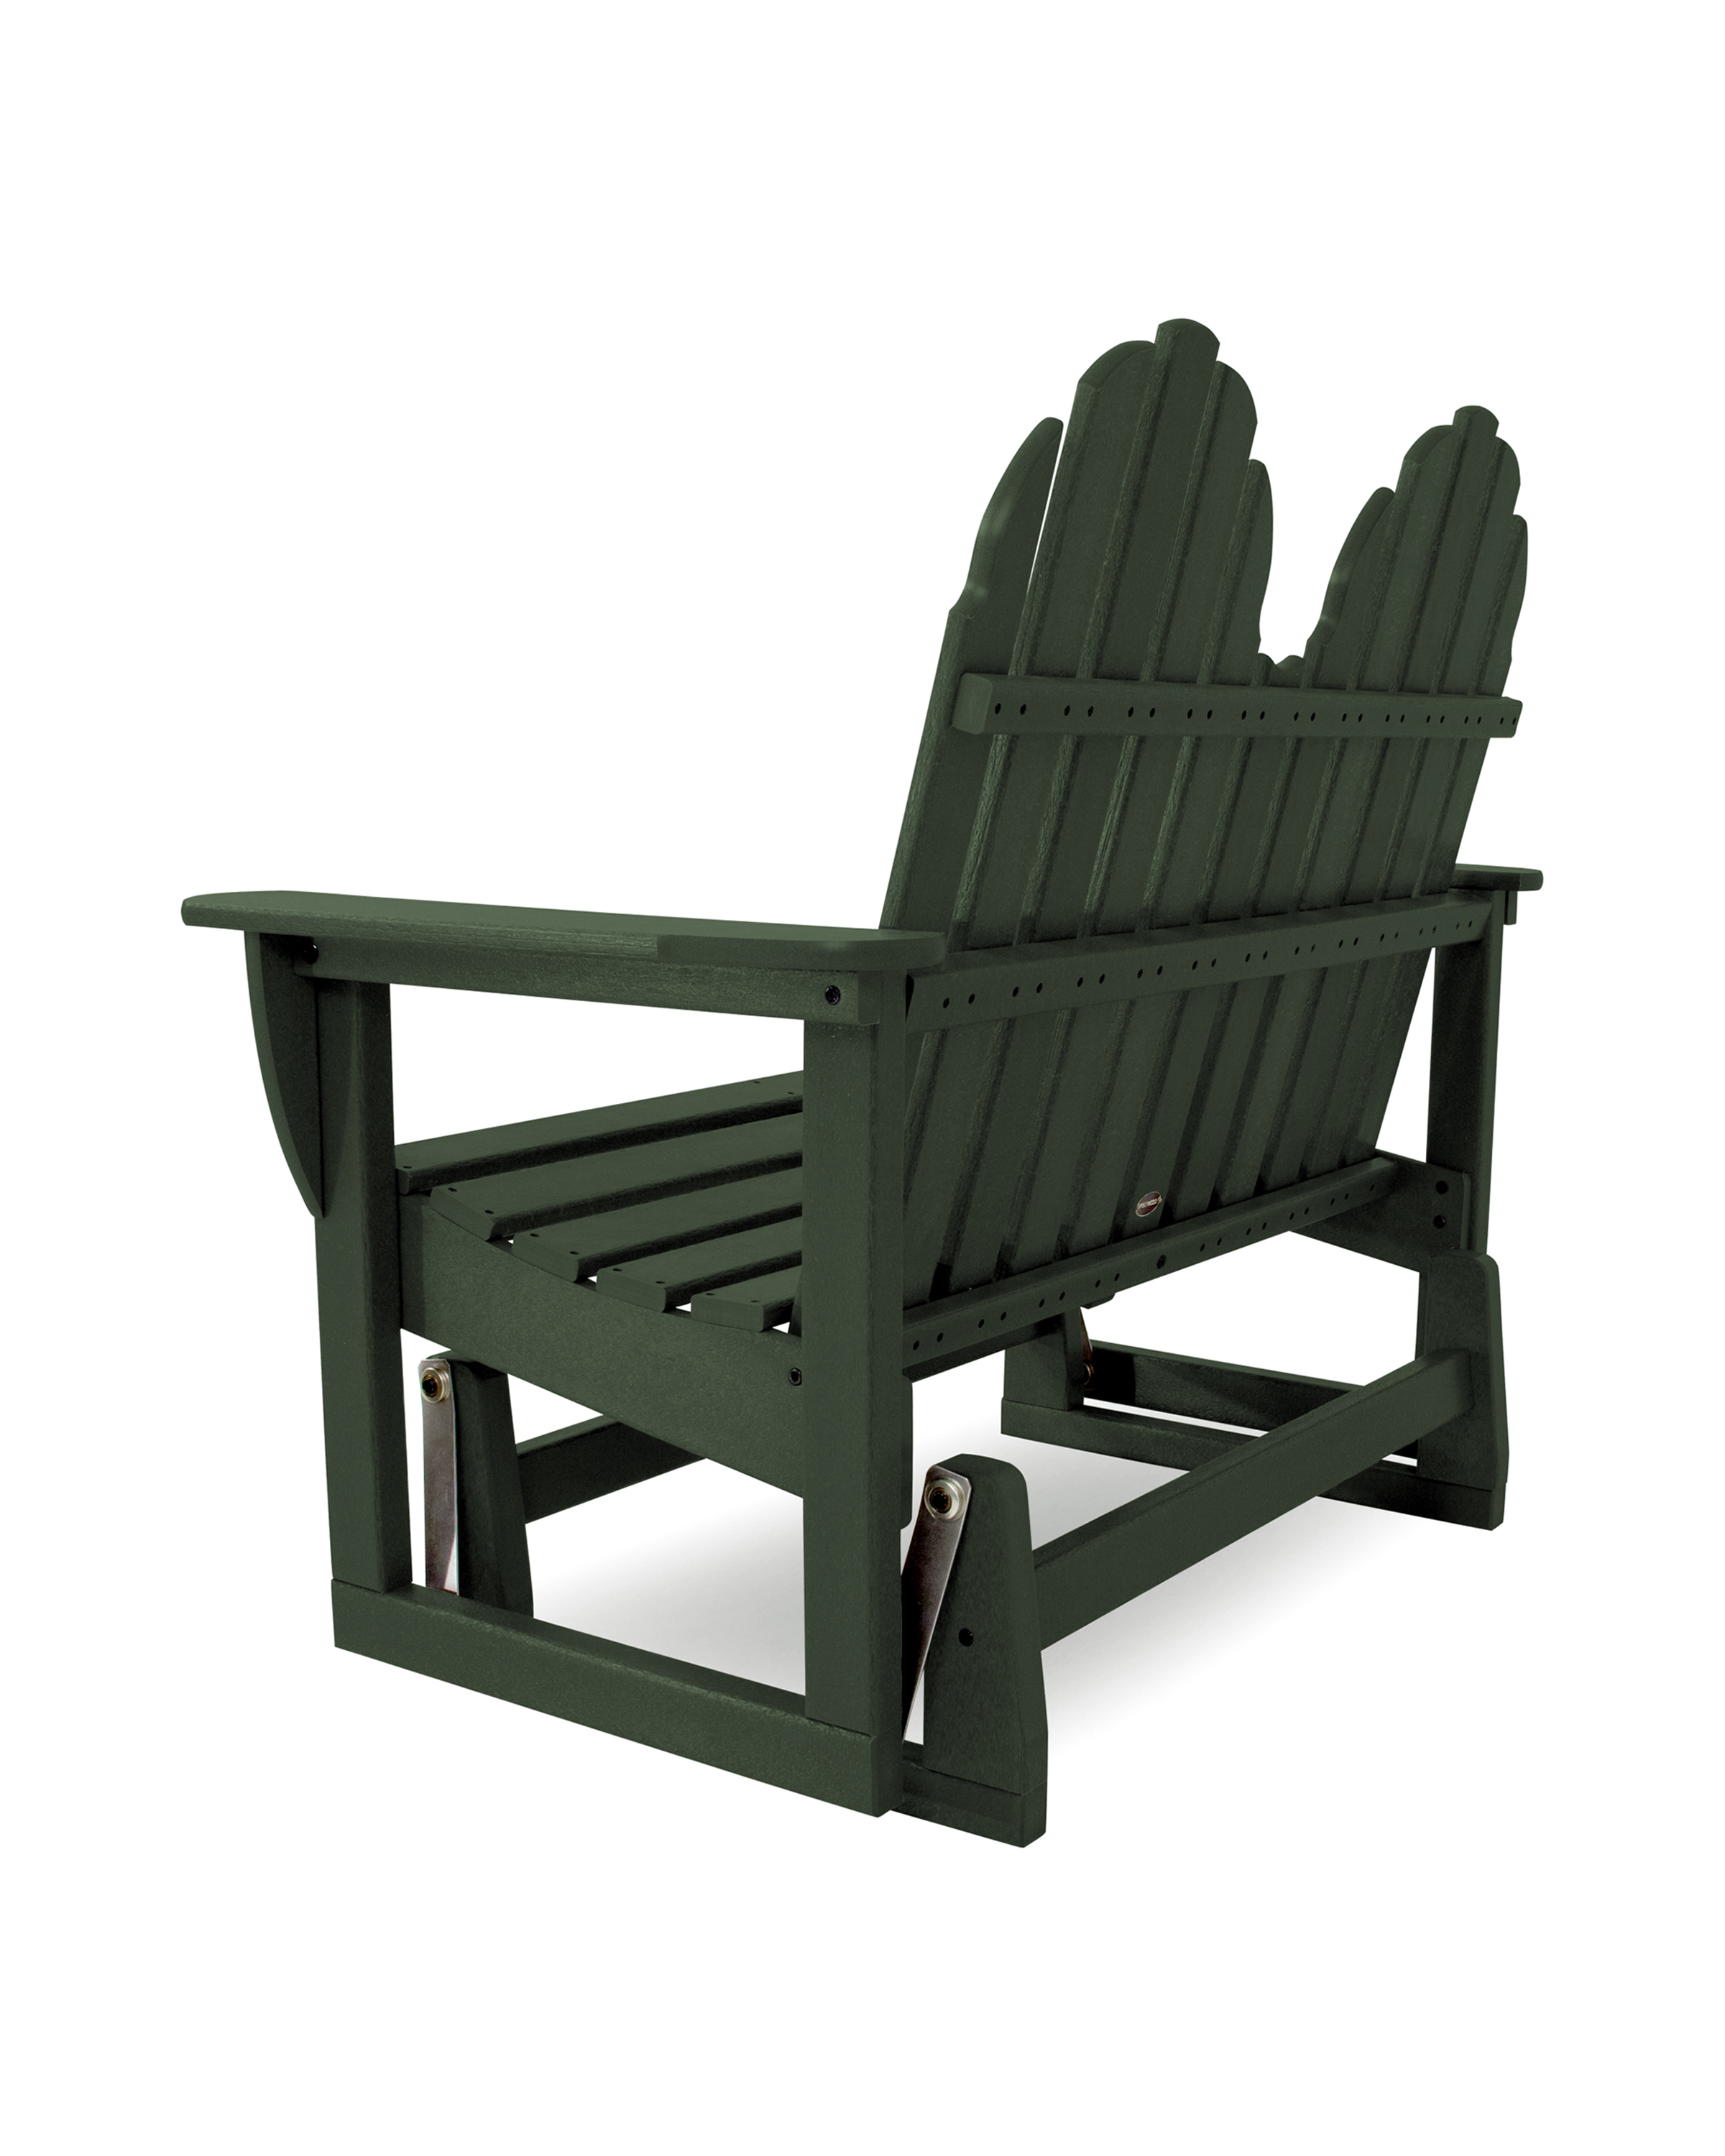 Escape The Day With Someone Special In Our Comfortable, Made-for-two Adirondack Glider. Polywood Furniture Is Constructed Of Solid Polywood Lumber That